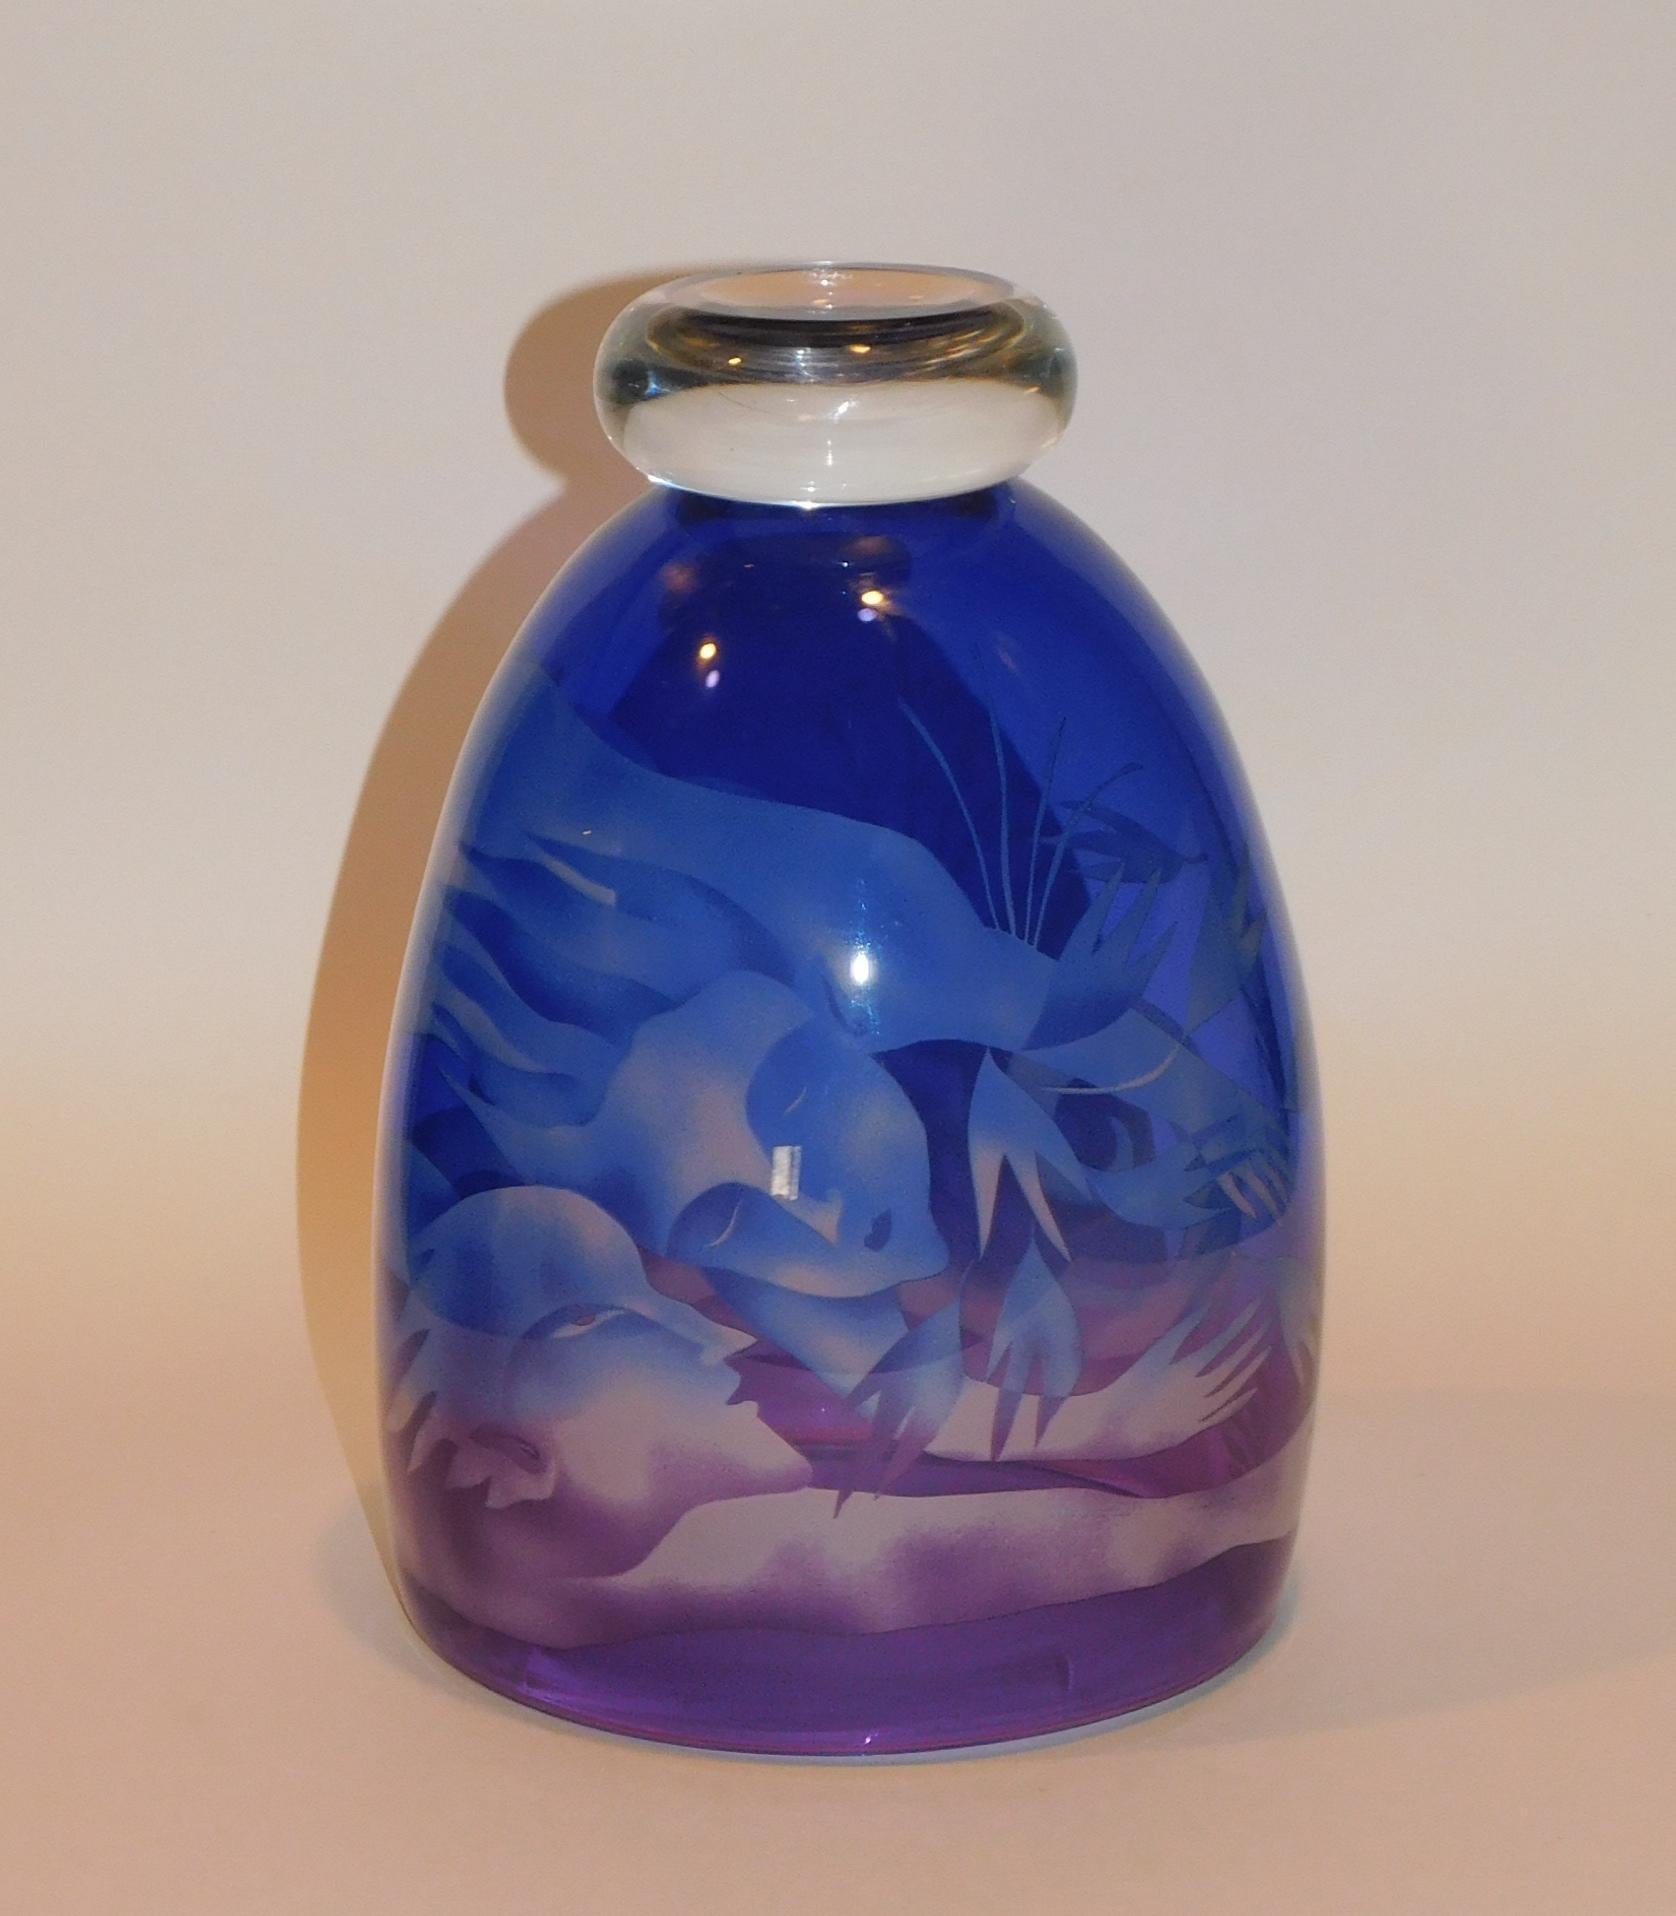 Naoko Takenouchi Cameo Glass Vase - Nocturne Series In Excellent Condition For Sale In Phoenix, AZ